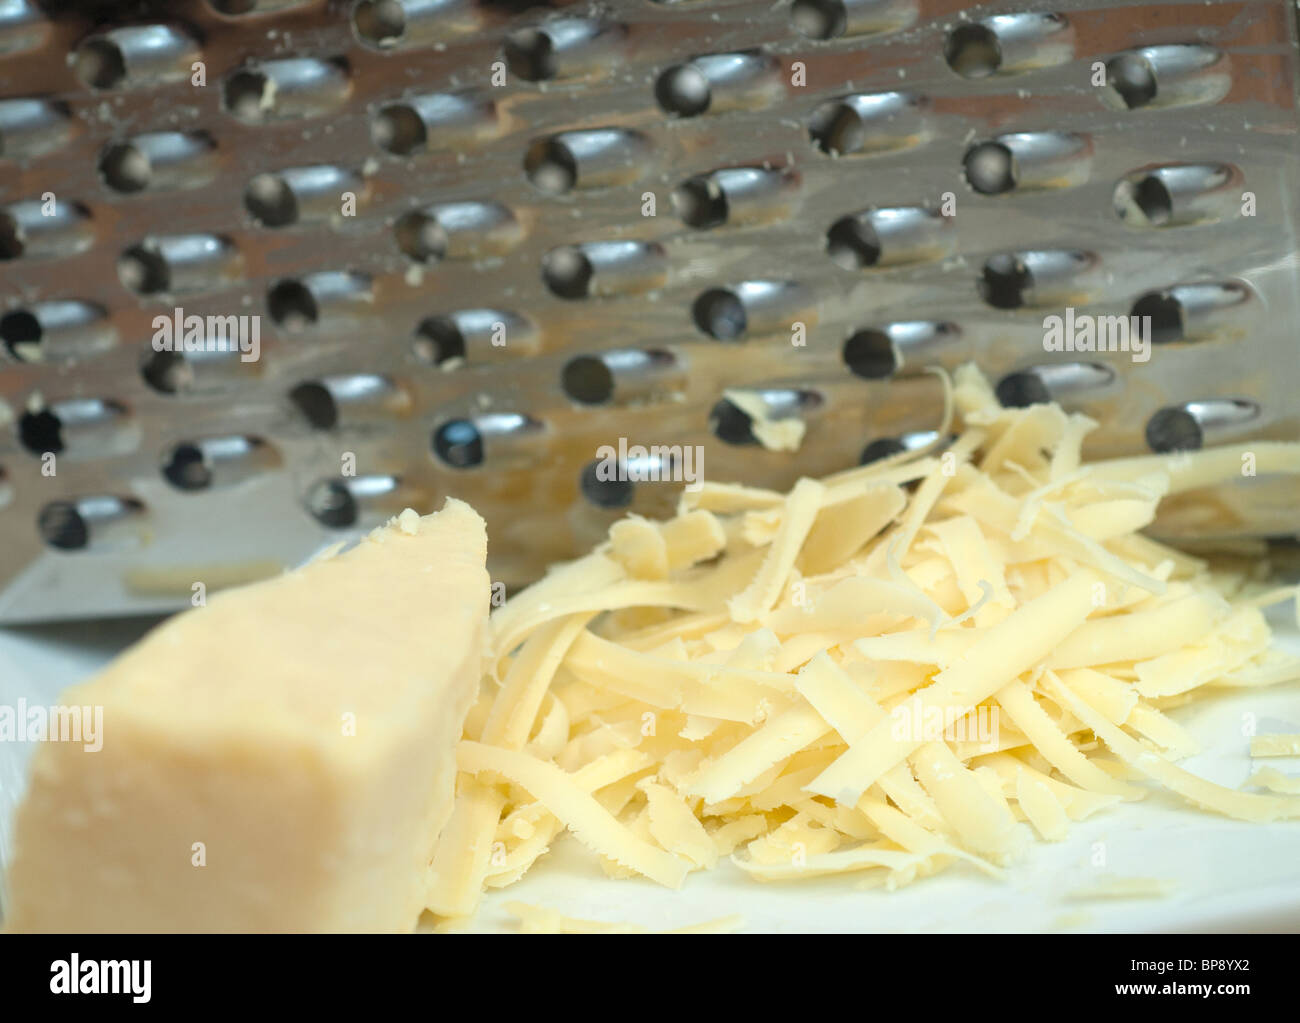 https://c8.alamy.com/comp/BP8YX2/grated-cheese-and-cheese-grater-BP8YX2.jpg